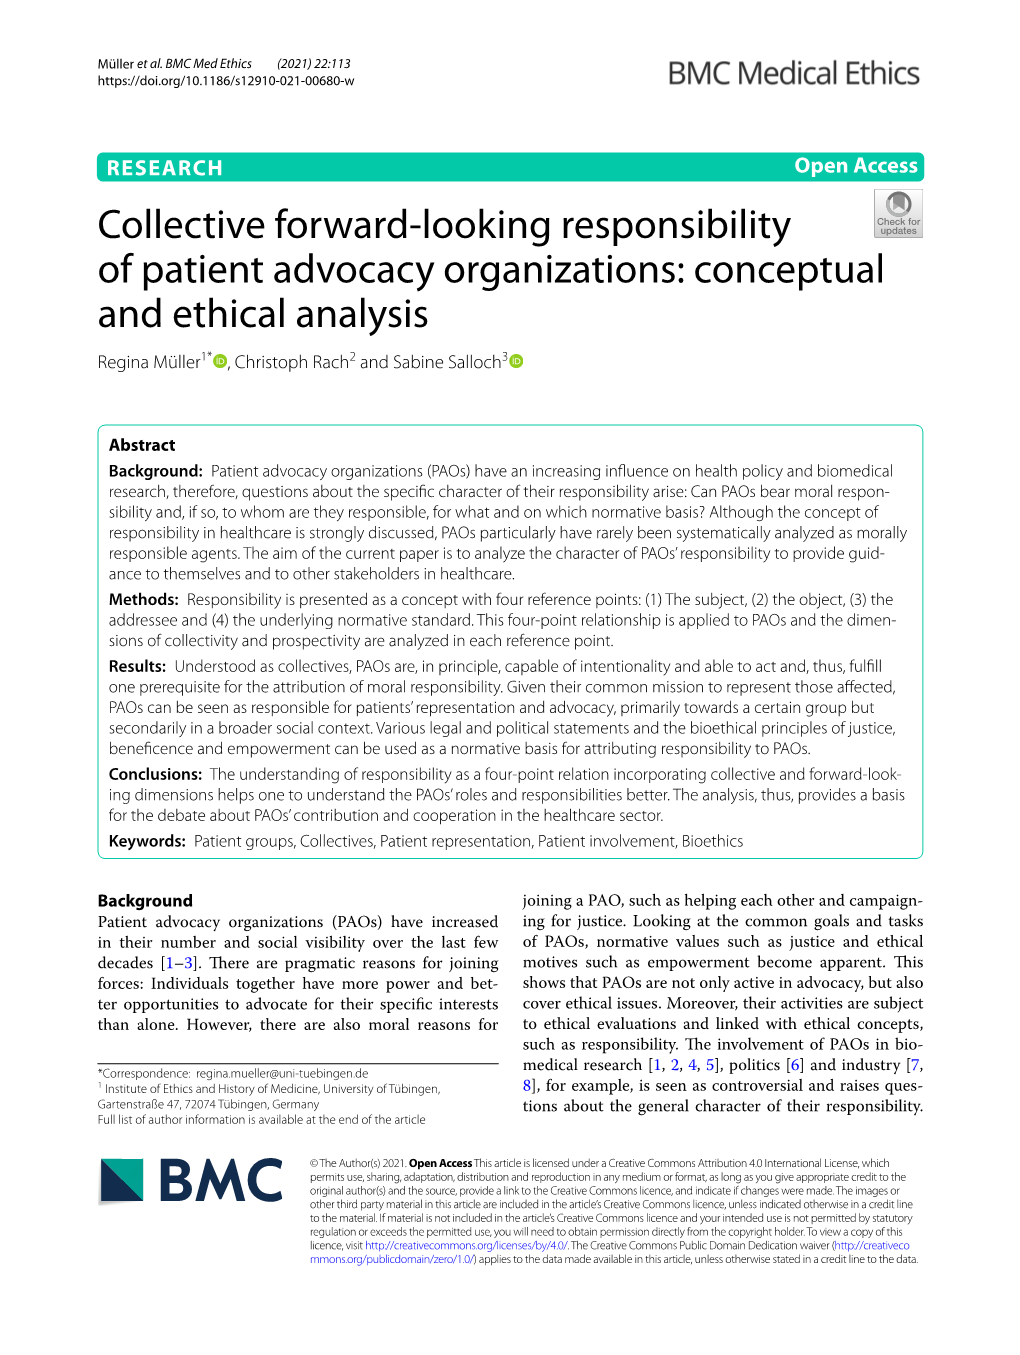 Collective Forward-Looking Responsibility of Patient Advocacy